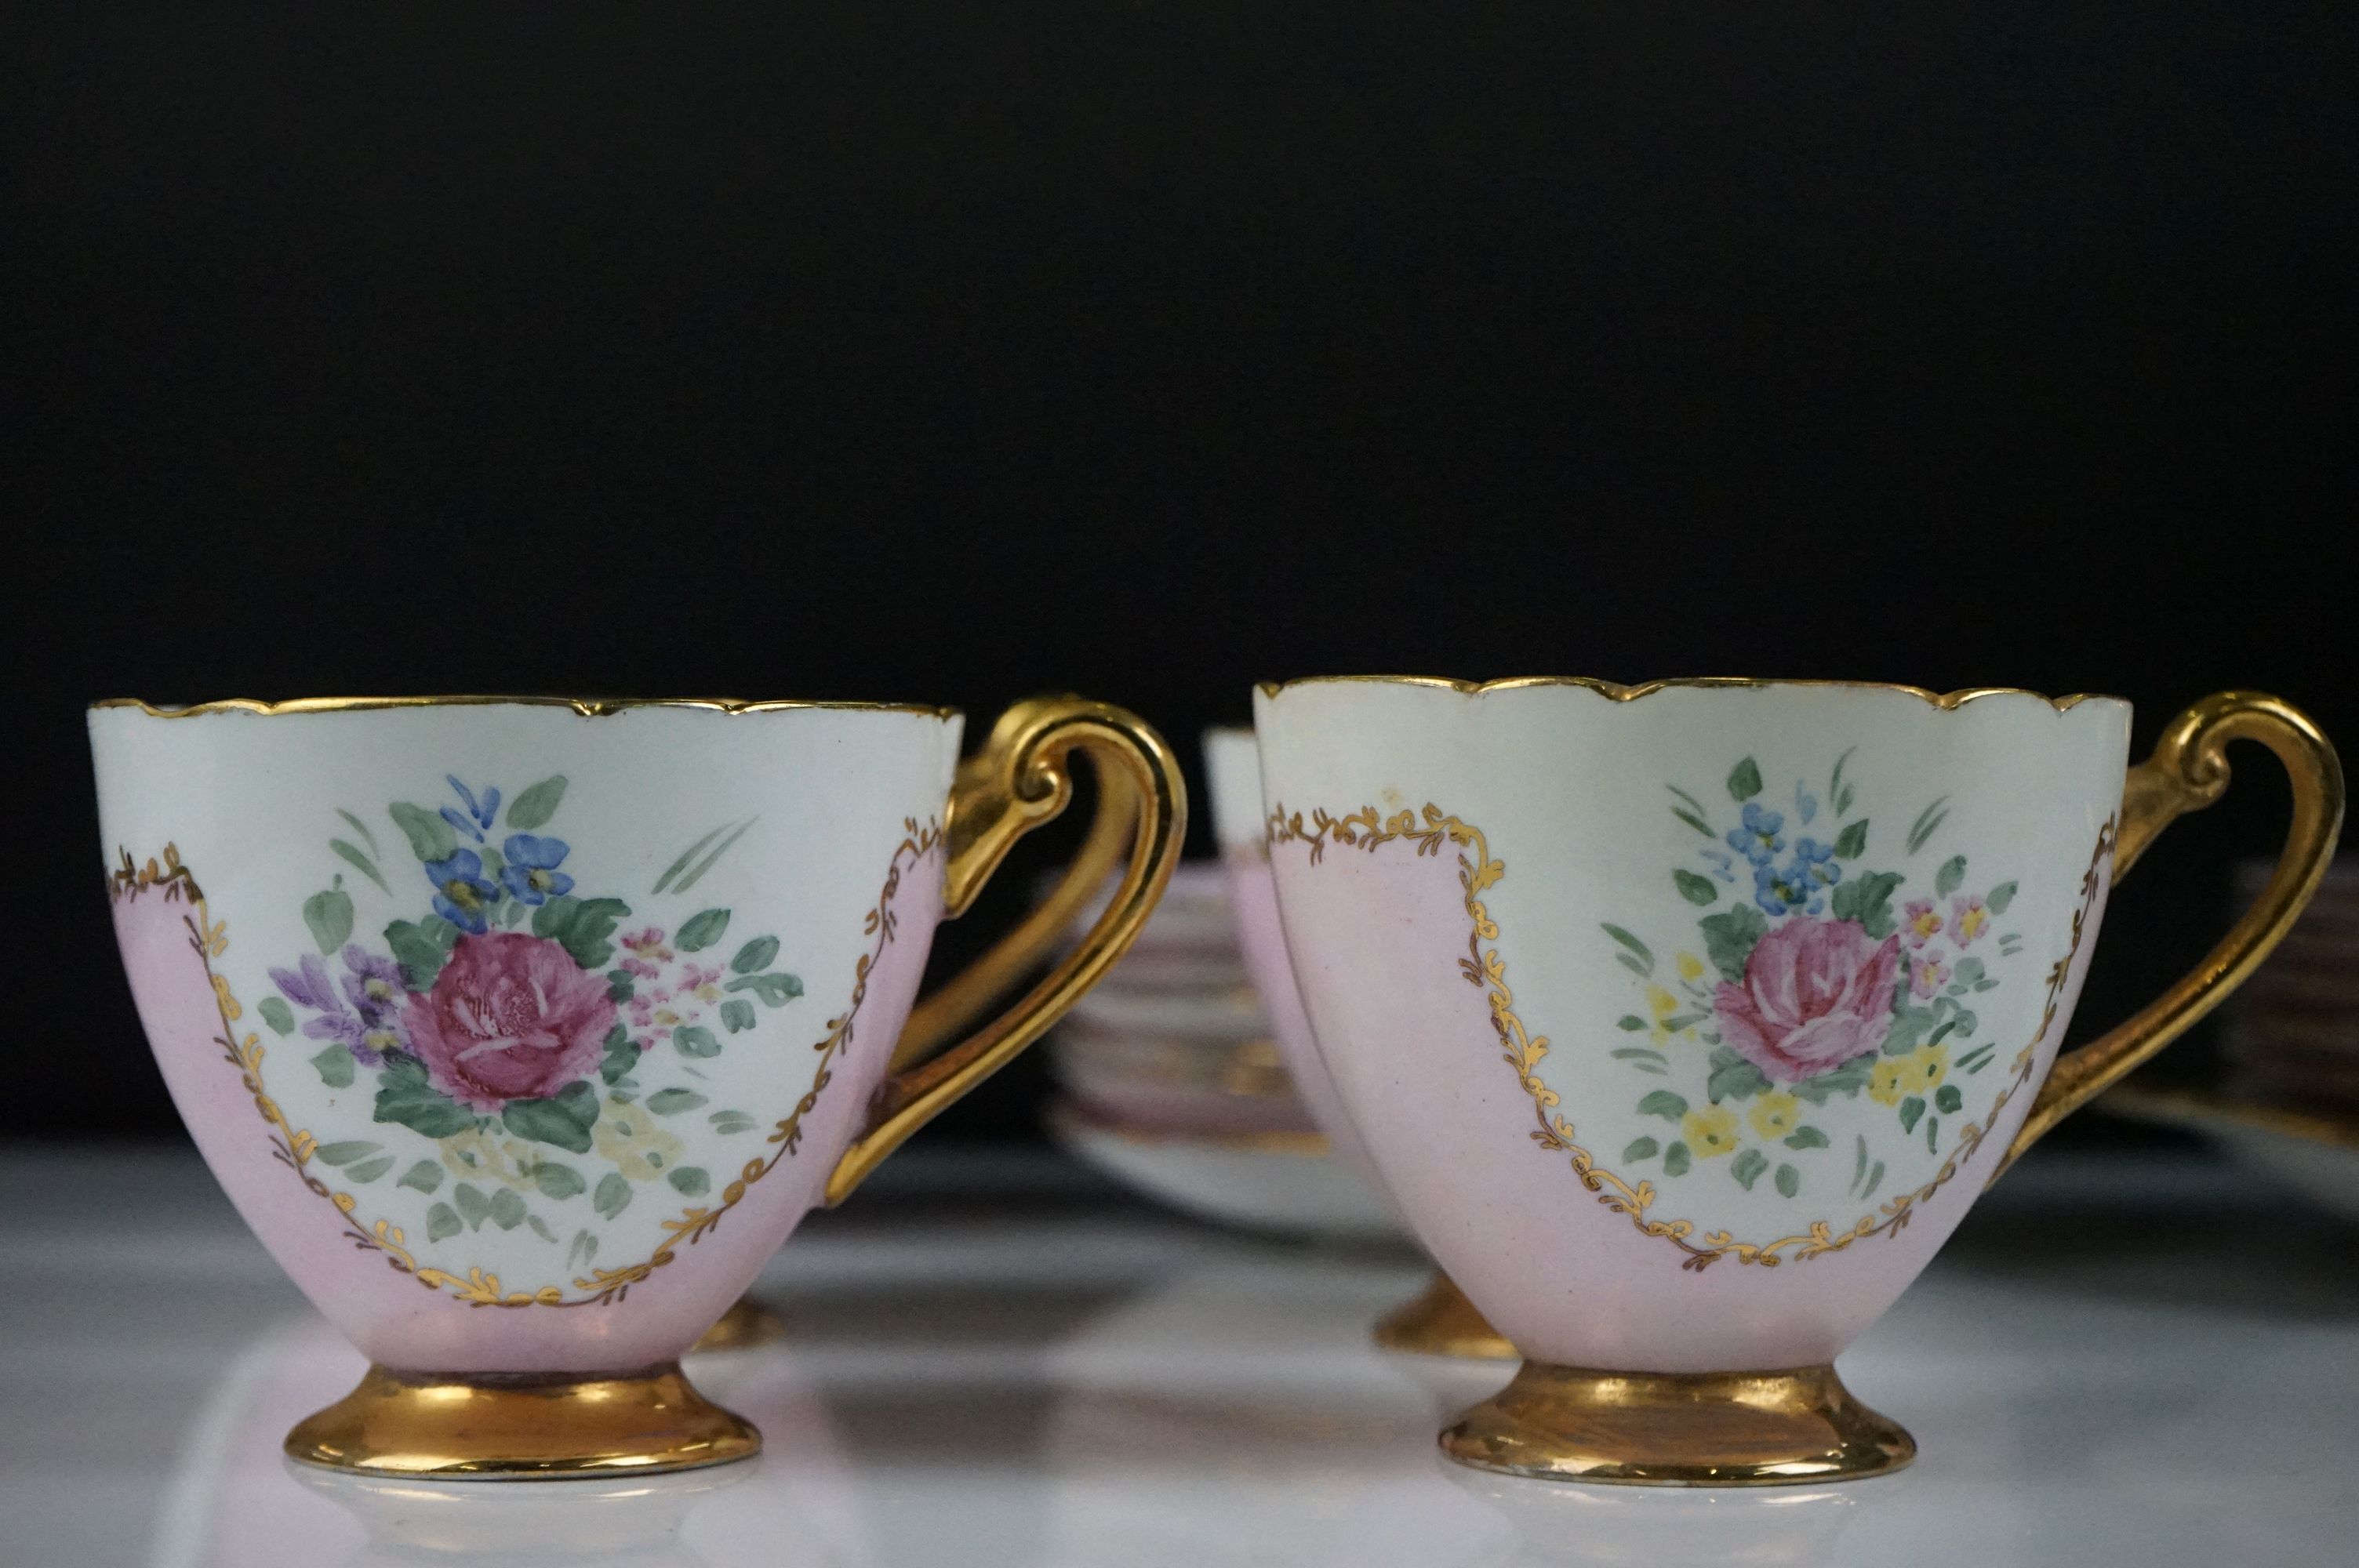 Early 20th Century Shelley hand painted floral tea ware on pink and white ground, with gilt - Image 2 of 12